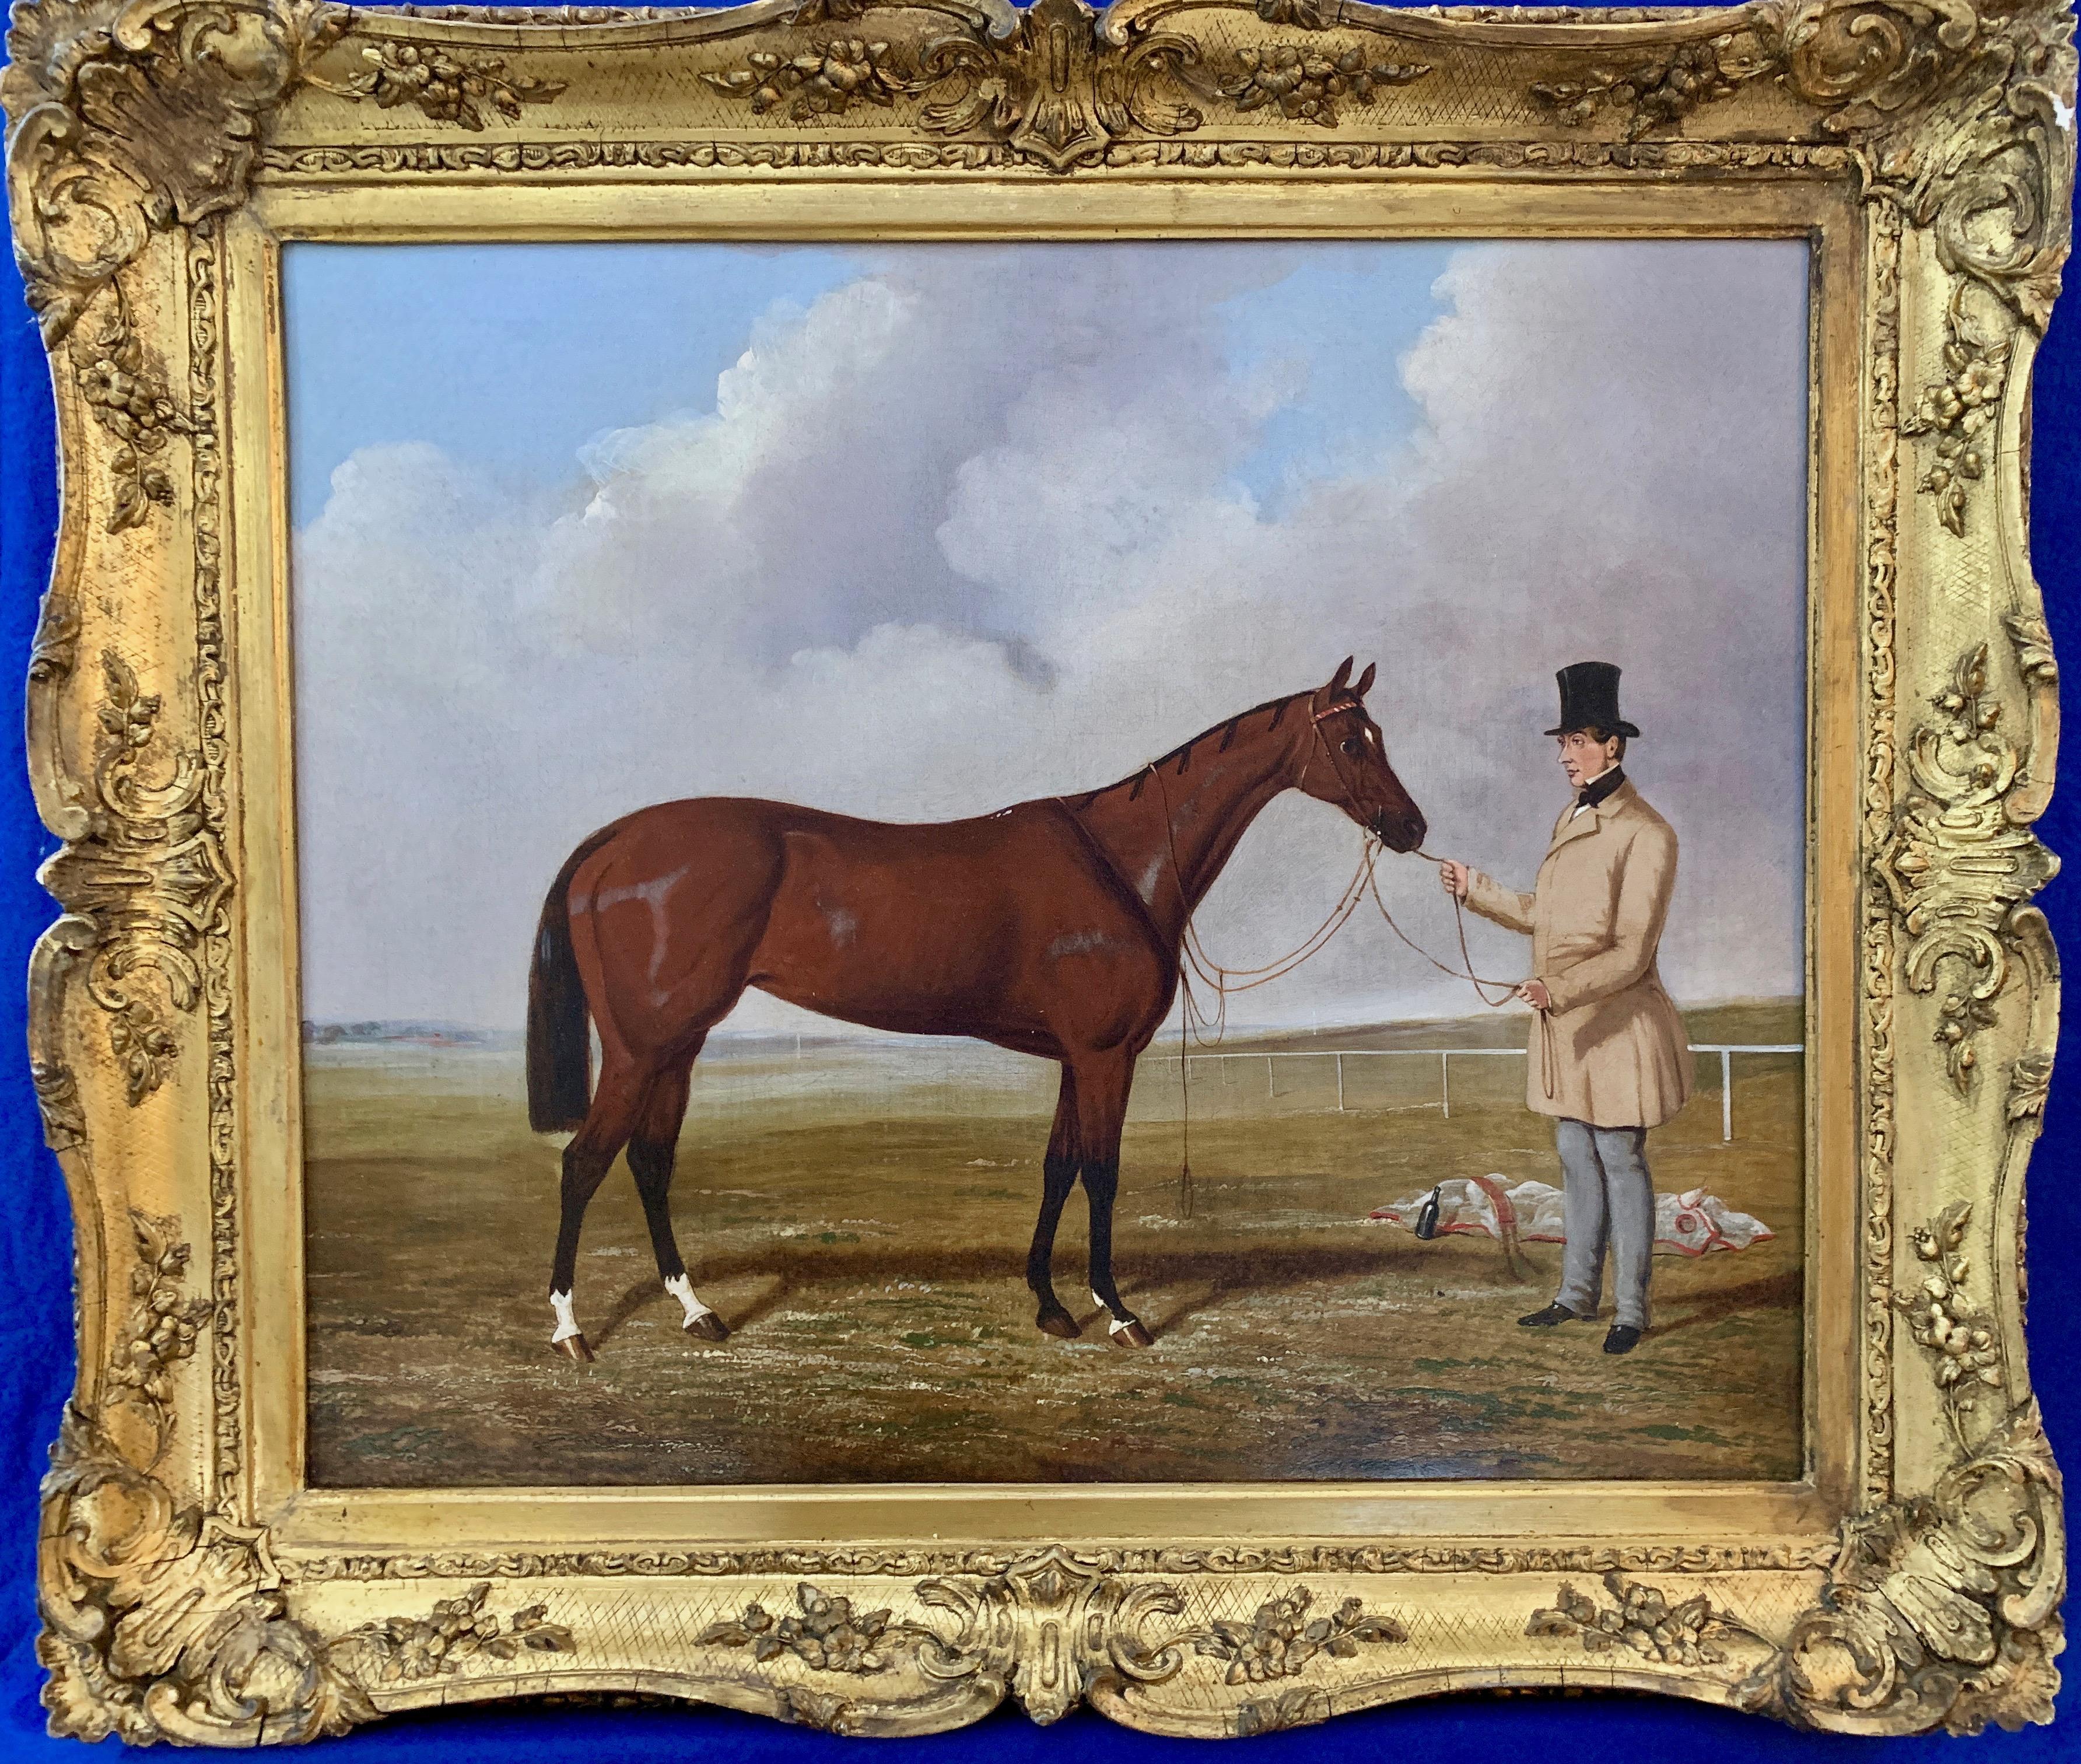 Thomas R Hart Animal Painting - Victorian 19th Century English Race Horse and Owner by a Race Track